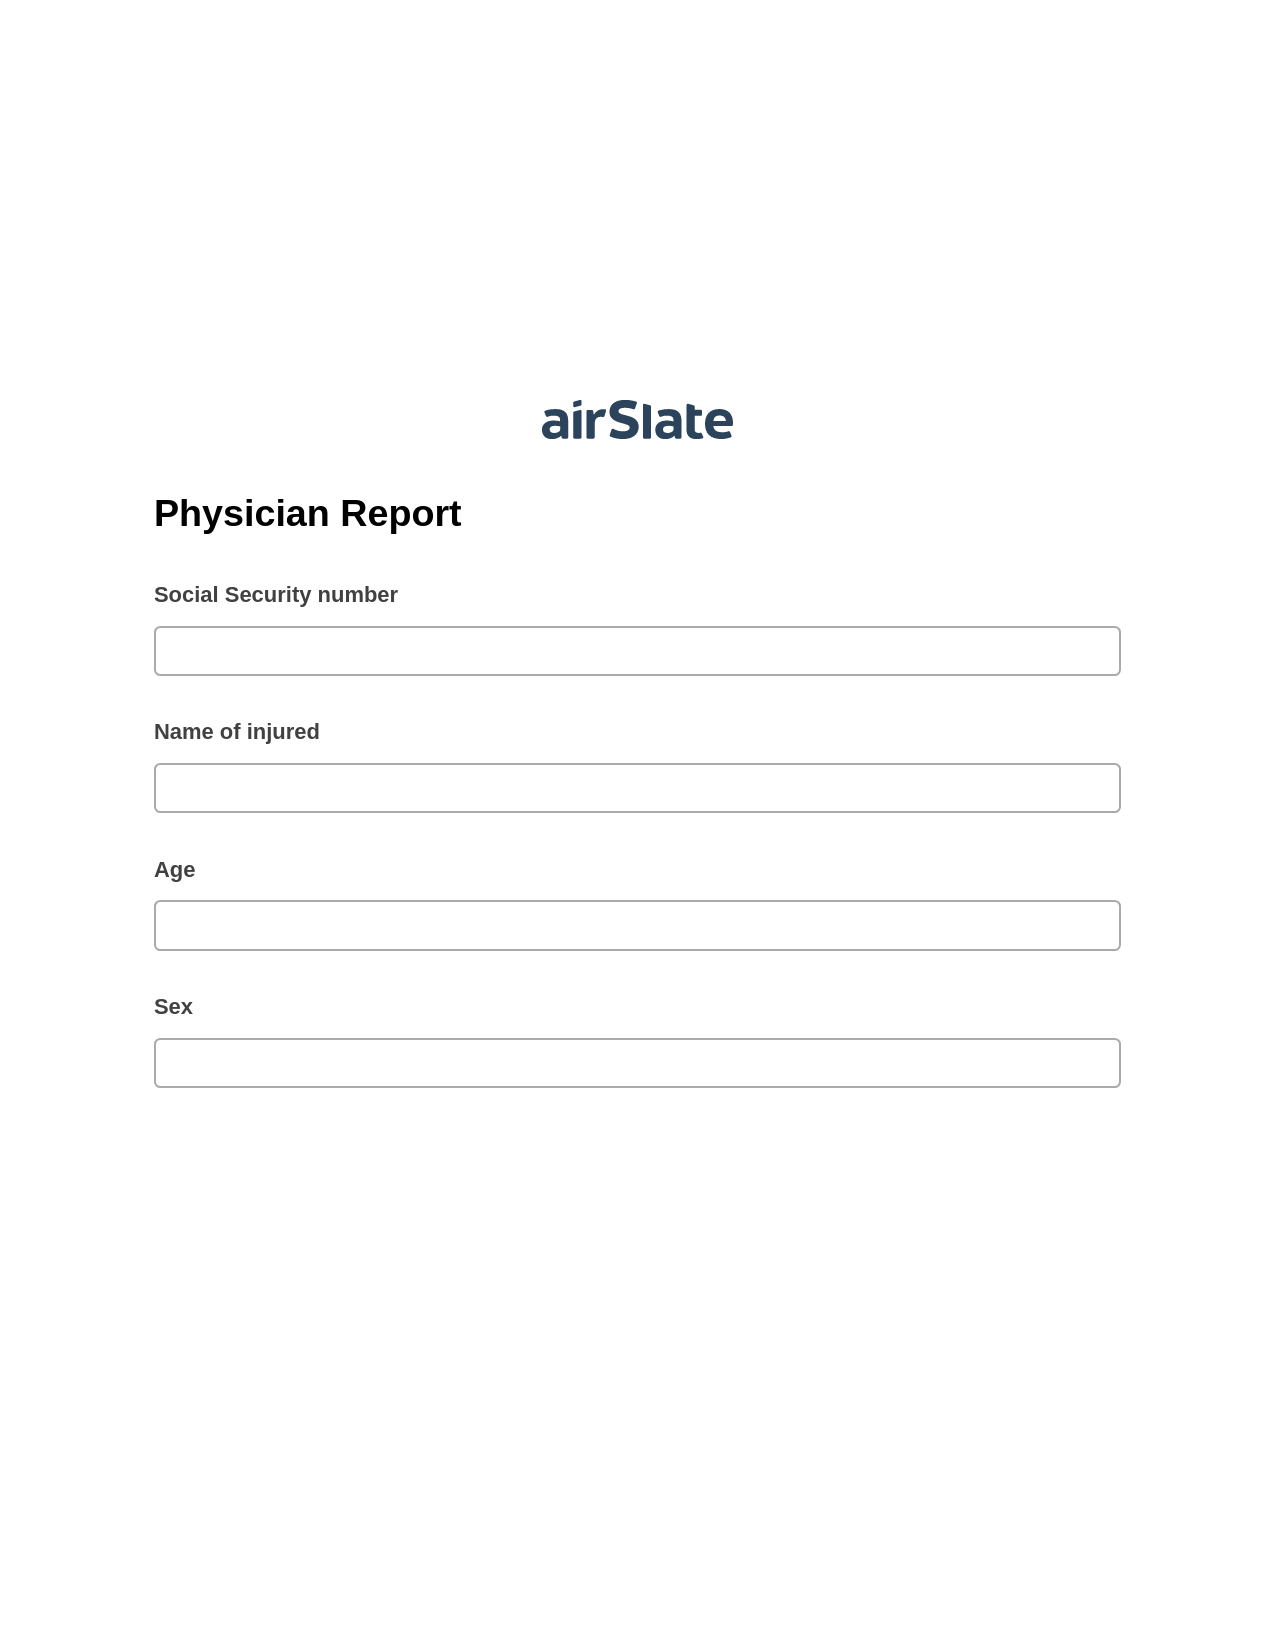 Physician Report Pre-fill from Excel Spreadsheet Bot, System Bot - Create a Slate in another Flow, Export to Excel 365 Bot